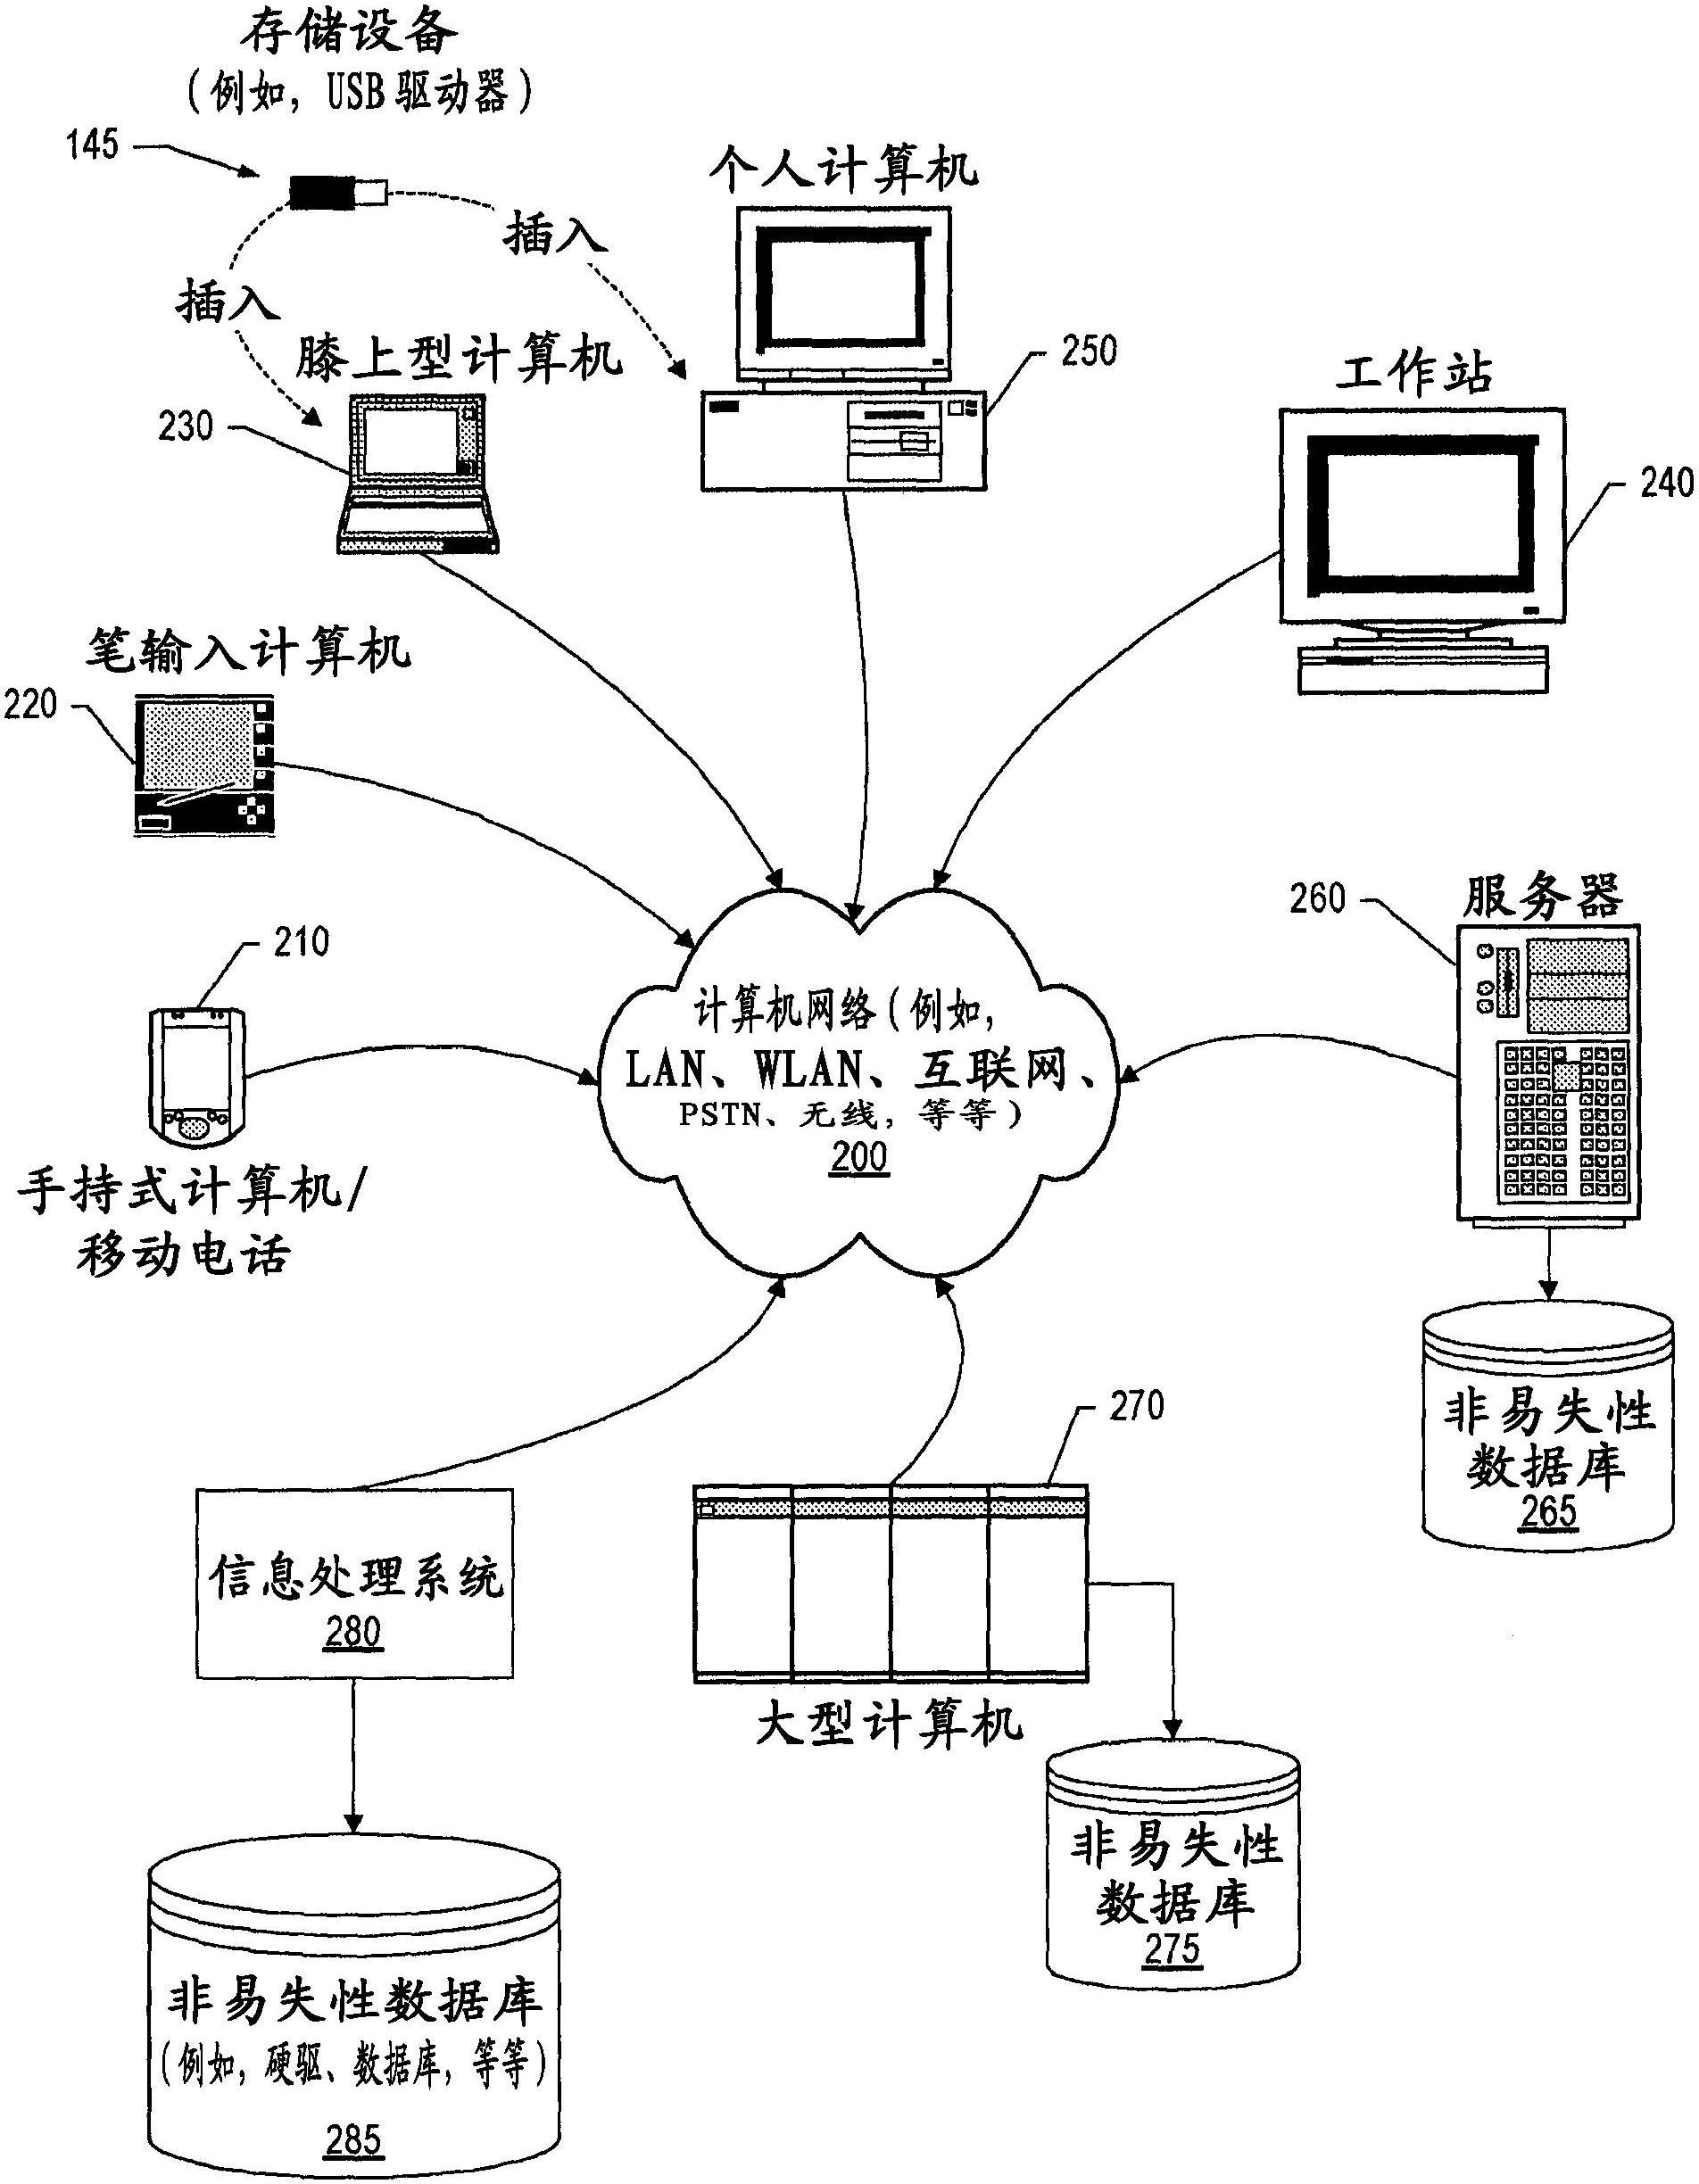 Secure kerberized access of encrypted file system